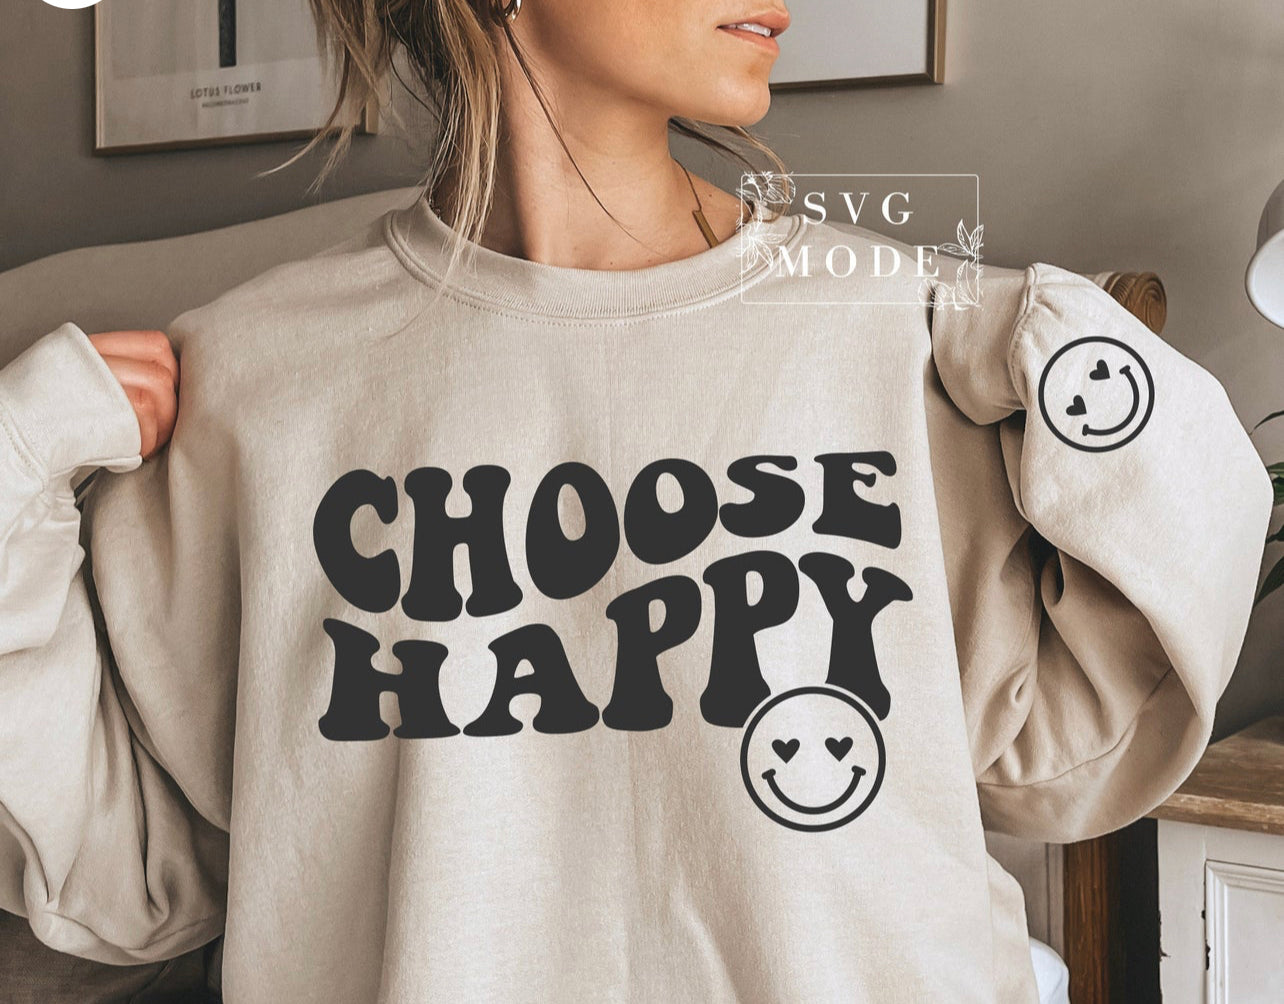 Choose happy with smiley